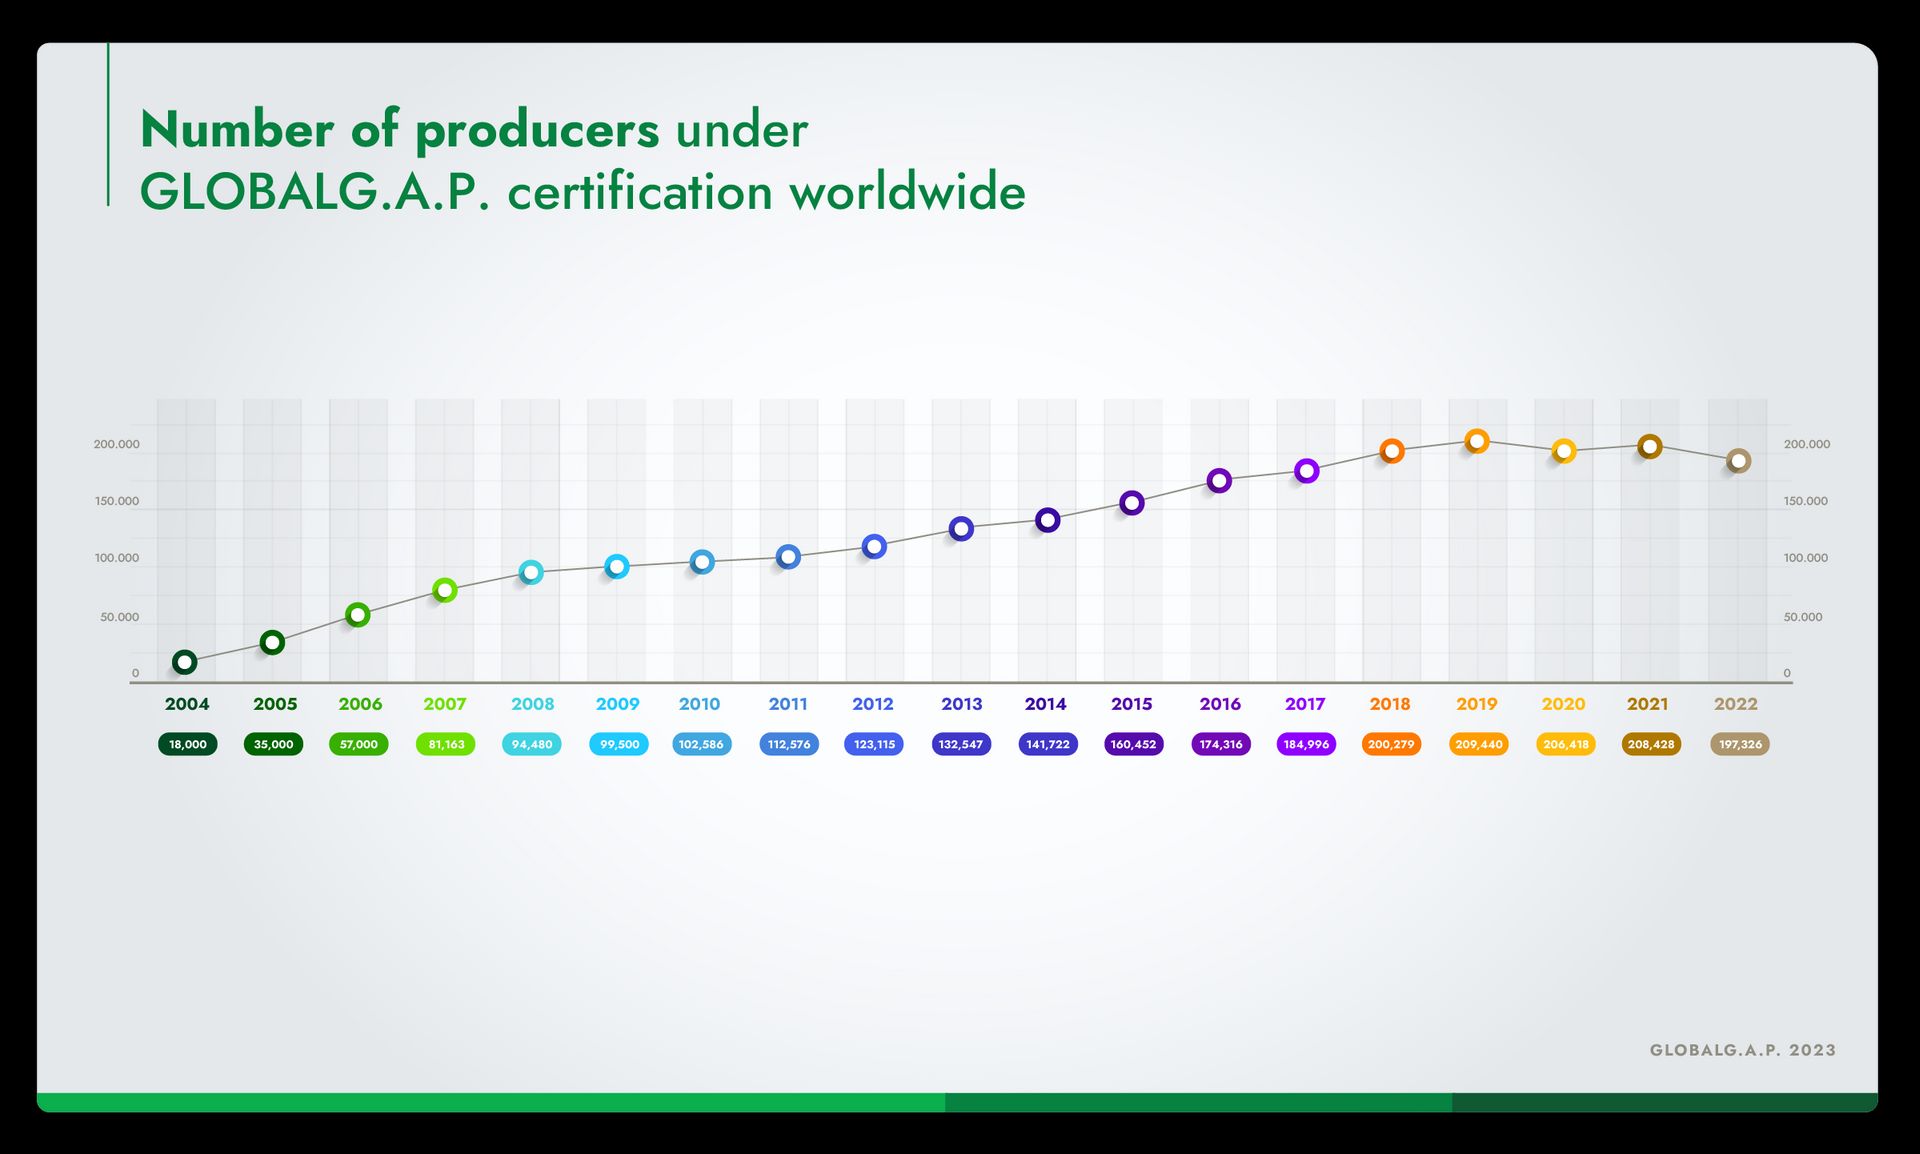 Infographic showing the number of producers under GLOBALG.A.P. certification year-on-year between 2004 and 2022